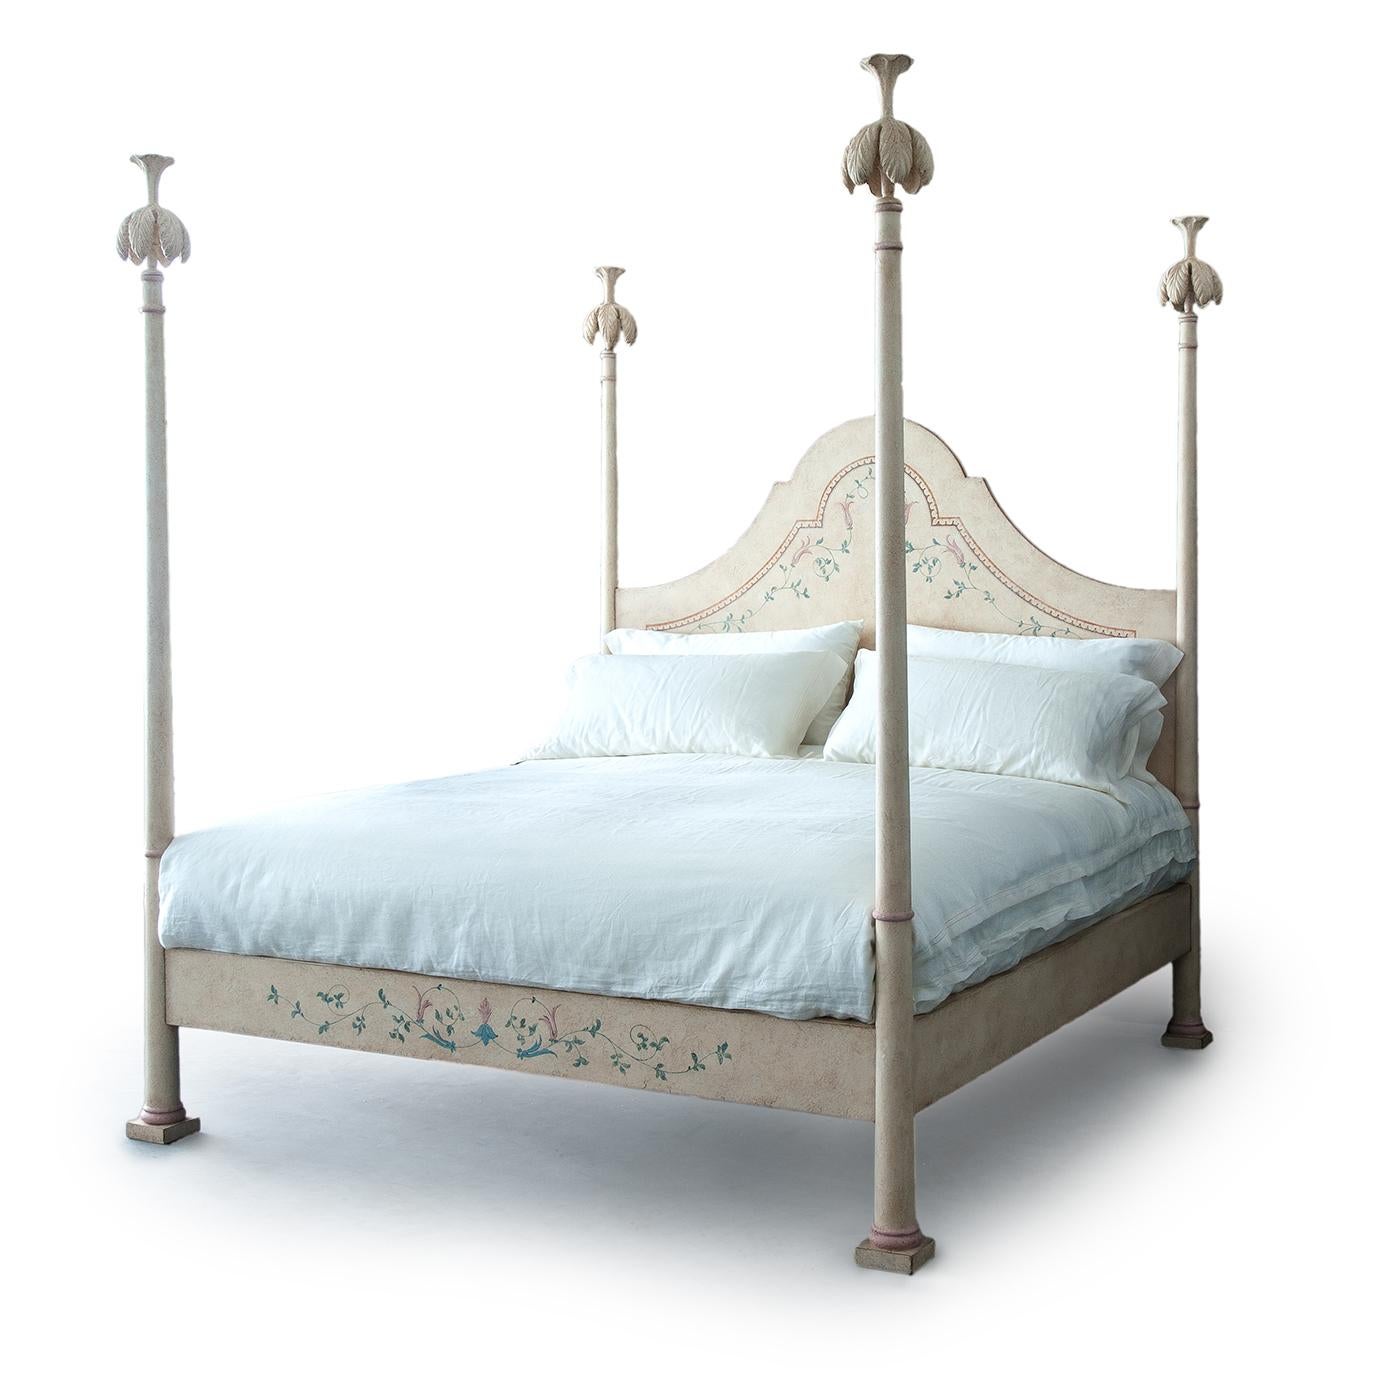 Presenting the stunning Roma Bed, a symbol of romance and enduring beauty. This hand-painted four-poster bed in ivory, adorned with elegant framings and delicate rosettes, is designed to make a timeless statement. Crafted with love and built to